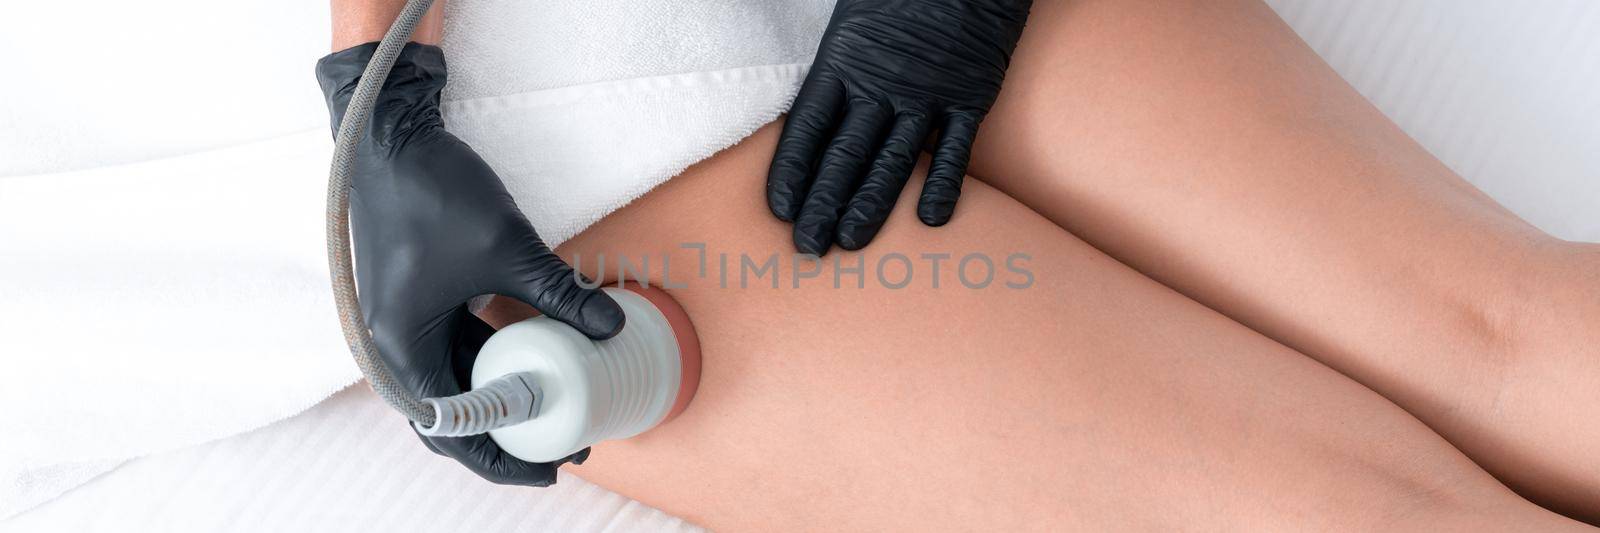 Beautiful woman having cavitation, procedure removing cellulite on legs and belly at beauty clinic by Mariakray